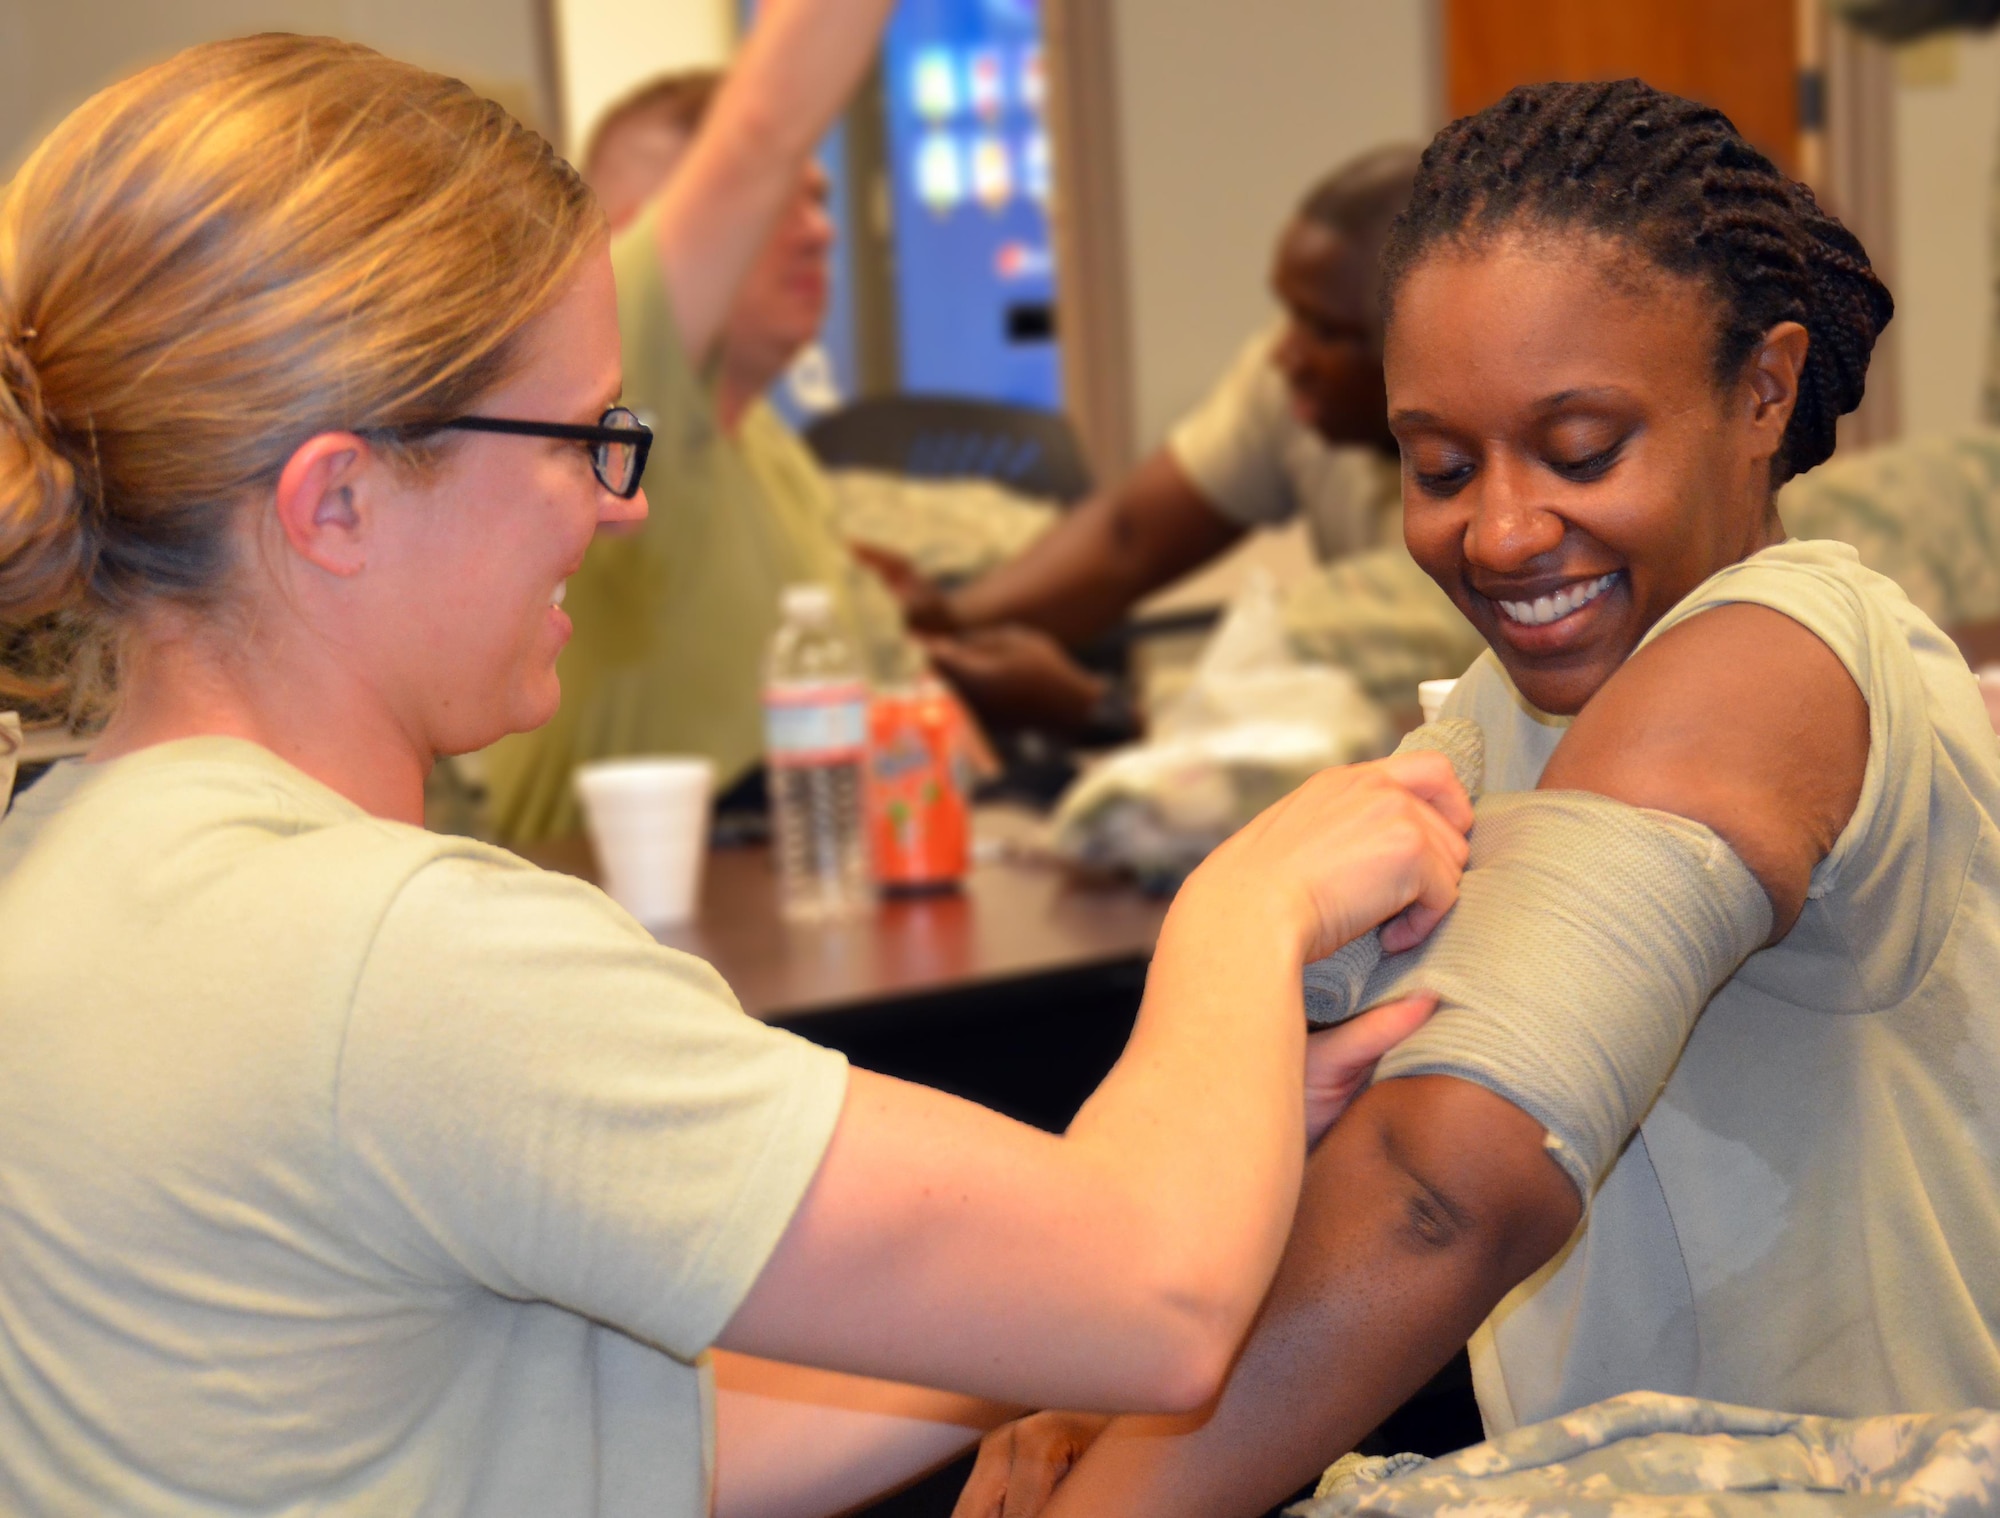 Chaplain candidate 2nd Lt. Kara Dula wraps a bandage around the arm of 2nd Lt. Meagan Davis at Robins Air Force Base, Georgia, July 25. The candidates are participating in the Air Force Reserve Command Chaplain Candidate Intensive Interview program which aims to provide an extensive overview of what the Air Force Reserve mission is as well as a broad overview of the military chaplain corps. During the last week of the program, the candidates were immersed in fast-paced mobility training conducted by active-duty instructors from the 5th Combat Communications Squadron Support. (U.S. Air Force photo/Tech. Sgt. Kelly Goonan)